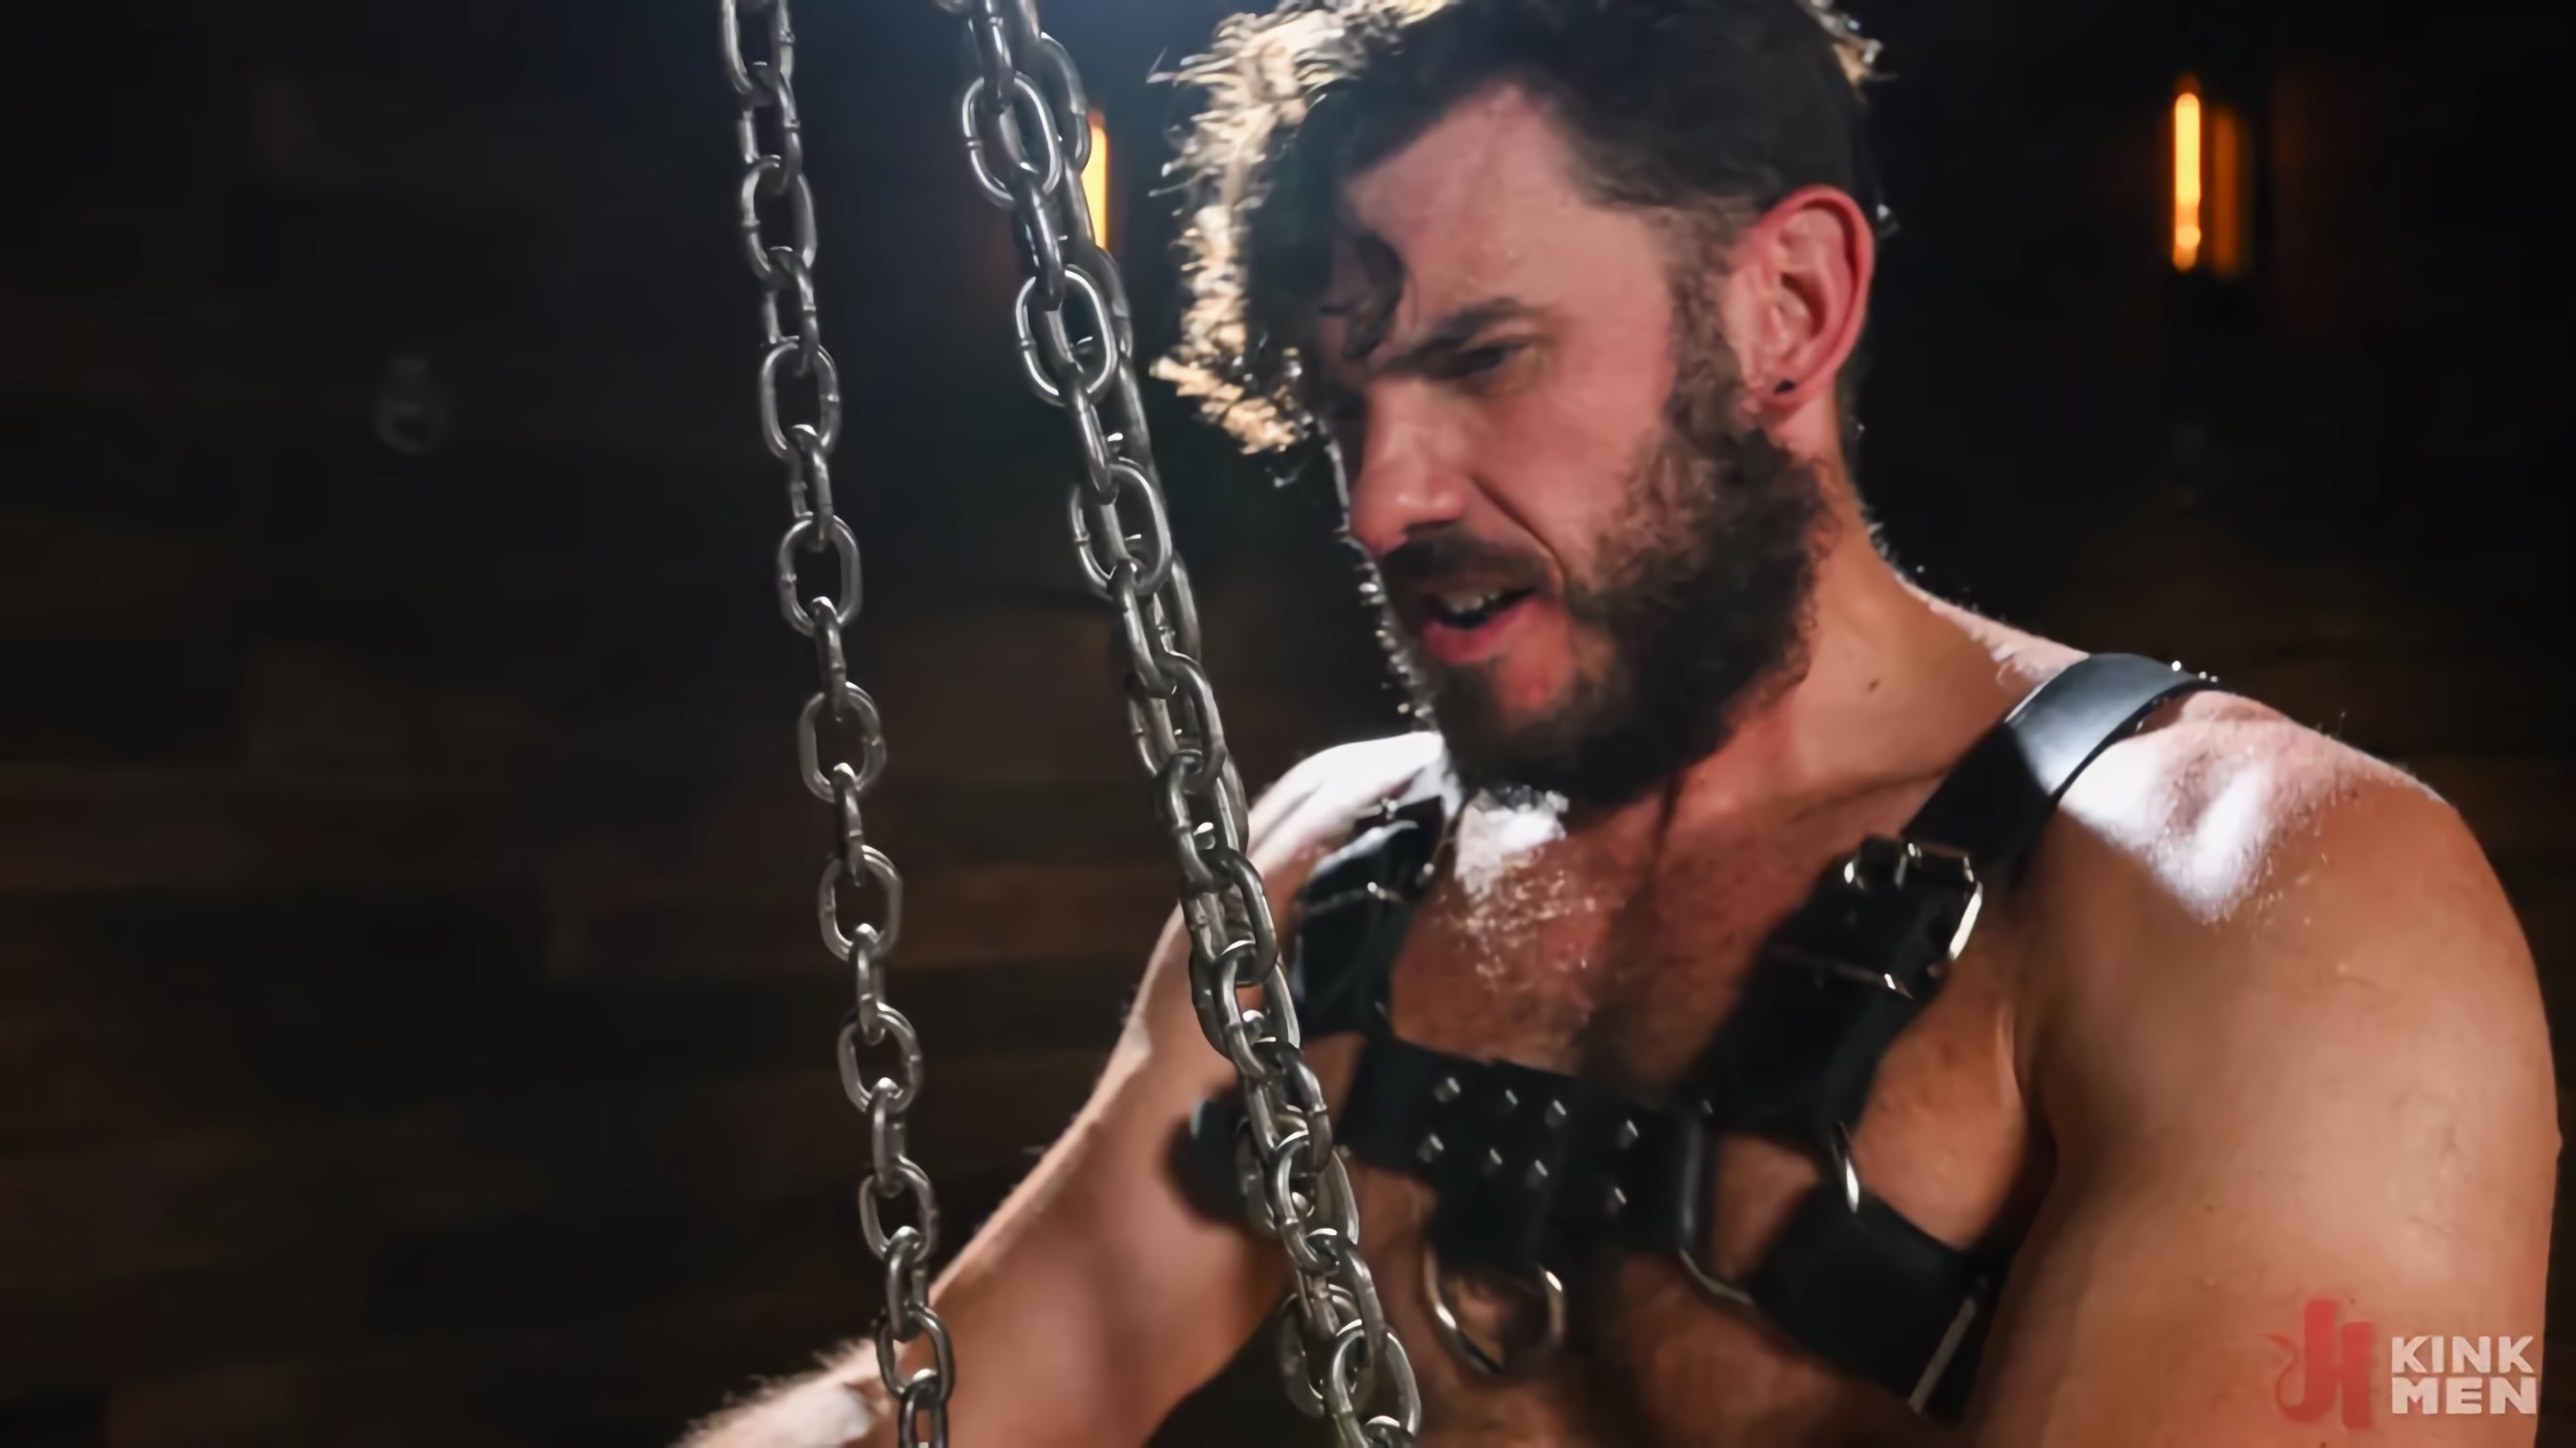 Kink Men 'TURTLE BOY: Buck Richards is fucked, flogged and bound in a metal cage and renamed Turtle Boy by Vander Pulaski' starring Vander Pulaski (Photo 26)